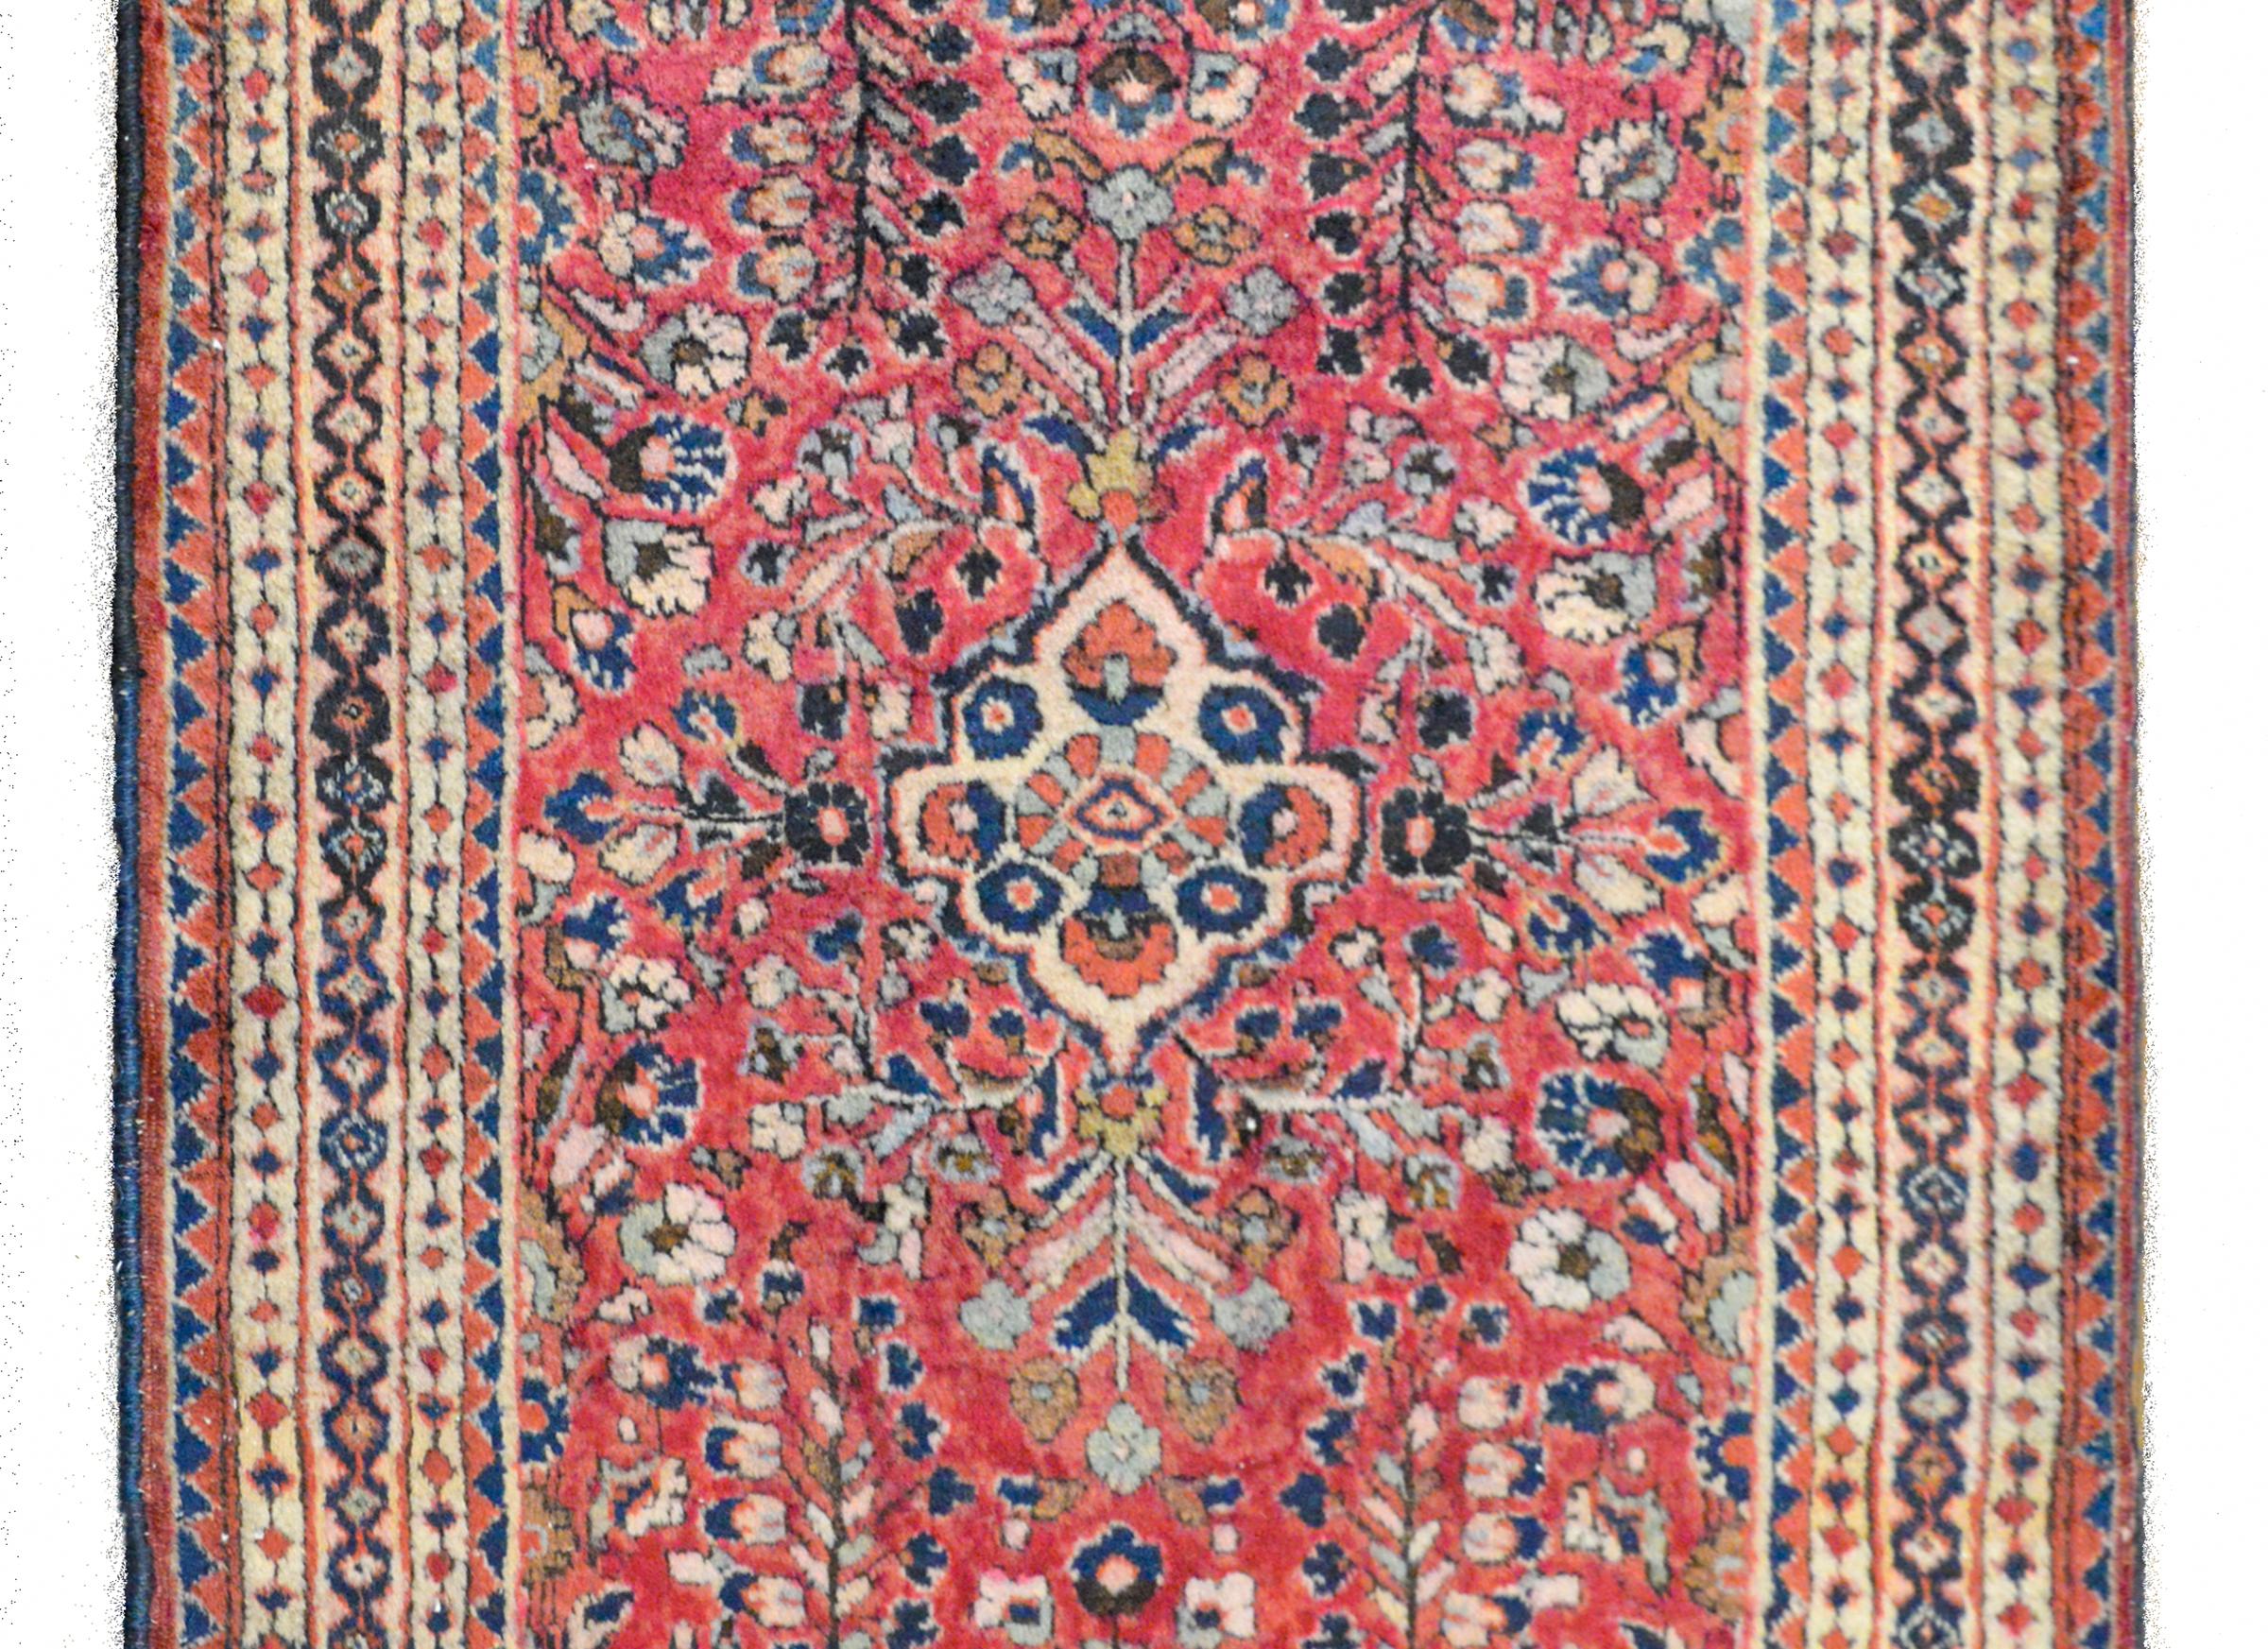 A fantastic early 20th century Persian Sarouk rug with a mirrored floral patterned field woven in pink, light and dark indigo, brown, and coral colored wool, and surrounded by a wide border containing multiple geometric pattered stripes.